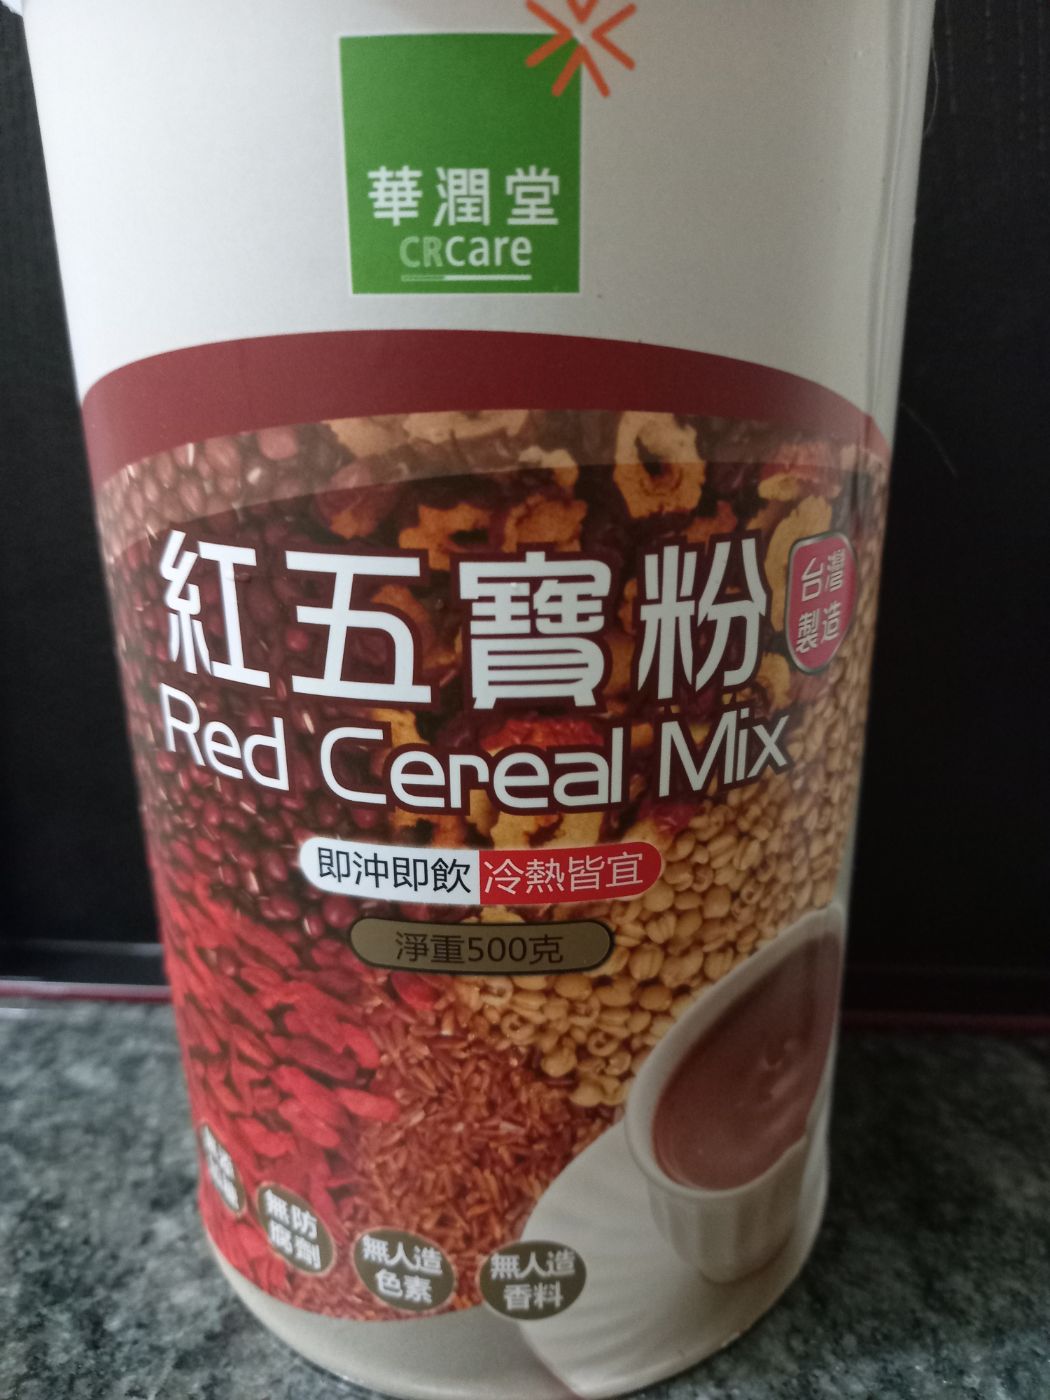 red cereal mix 紅五寶粉(500g)，HK.00  (1).jpg